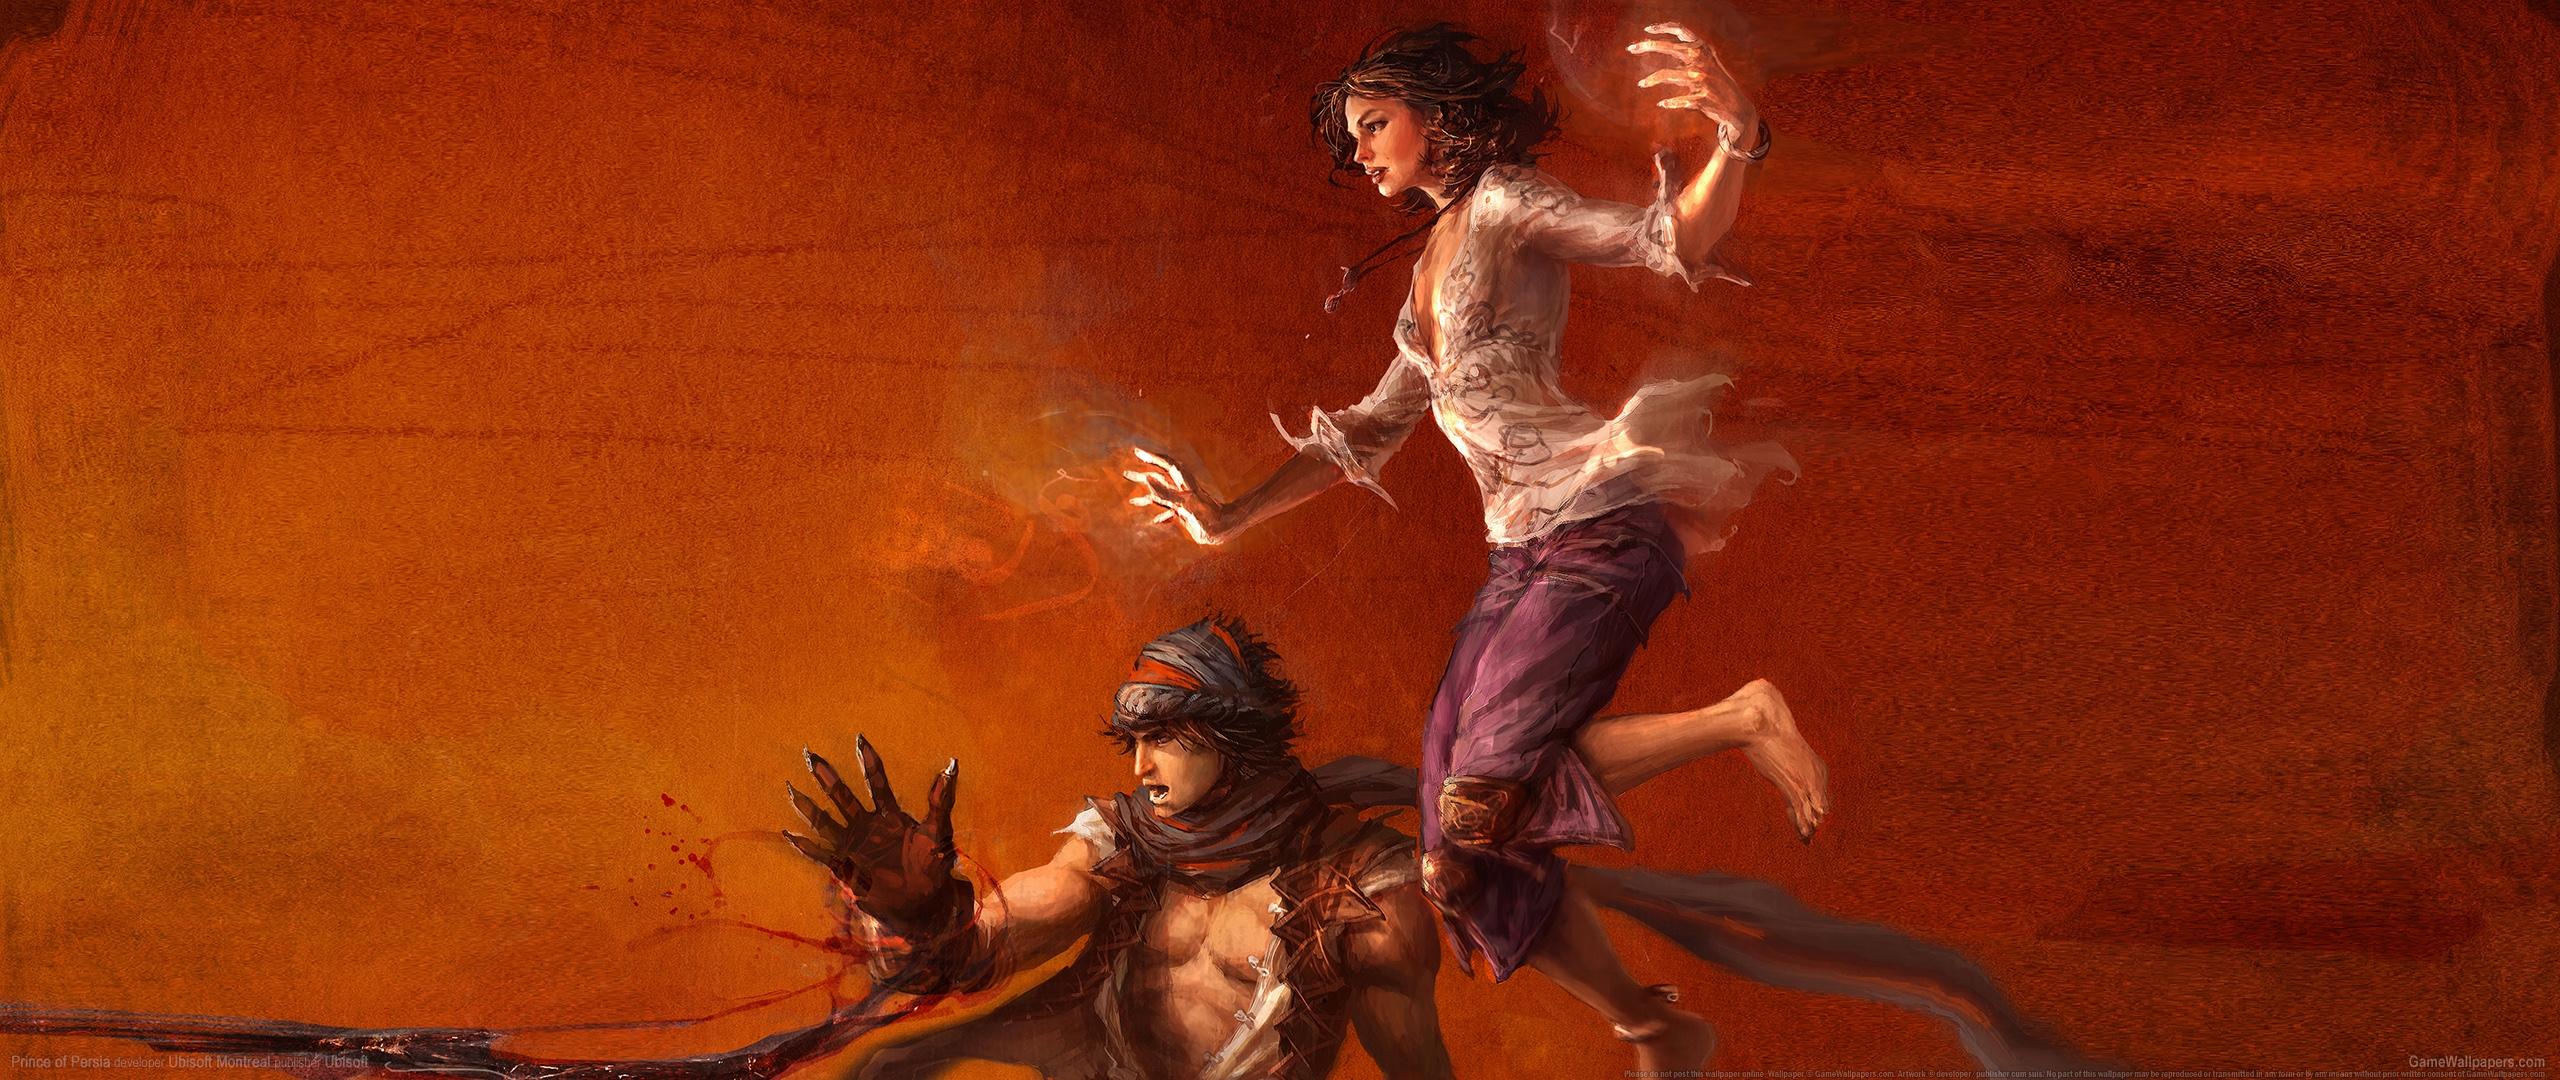 Prince of Persia 2560x1080 wallpaper or background 07